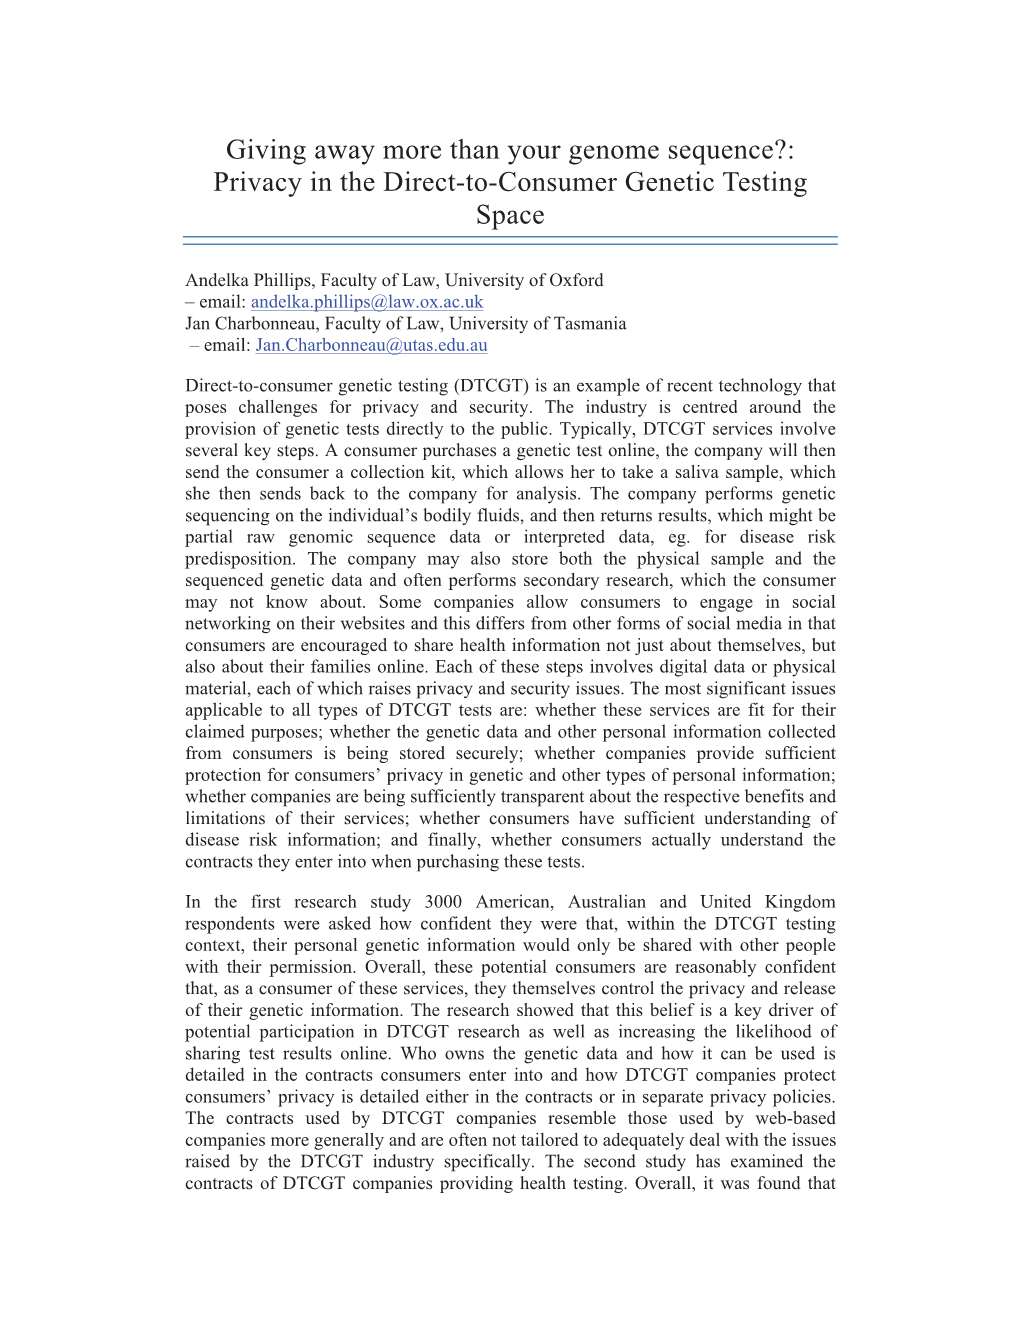 Giving Away More Than Your Genome Sequence?: Privacy in the Direct-To-Consumer Genetic Testing Space